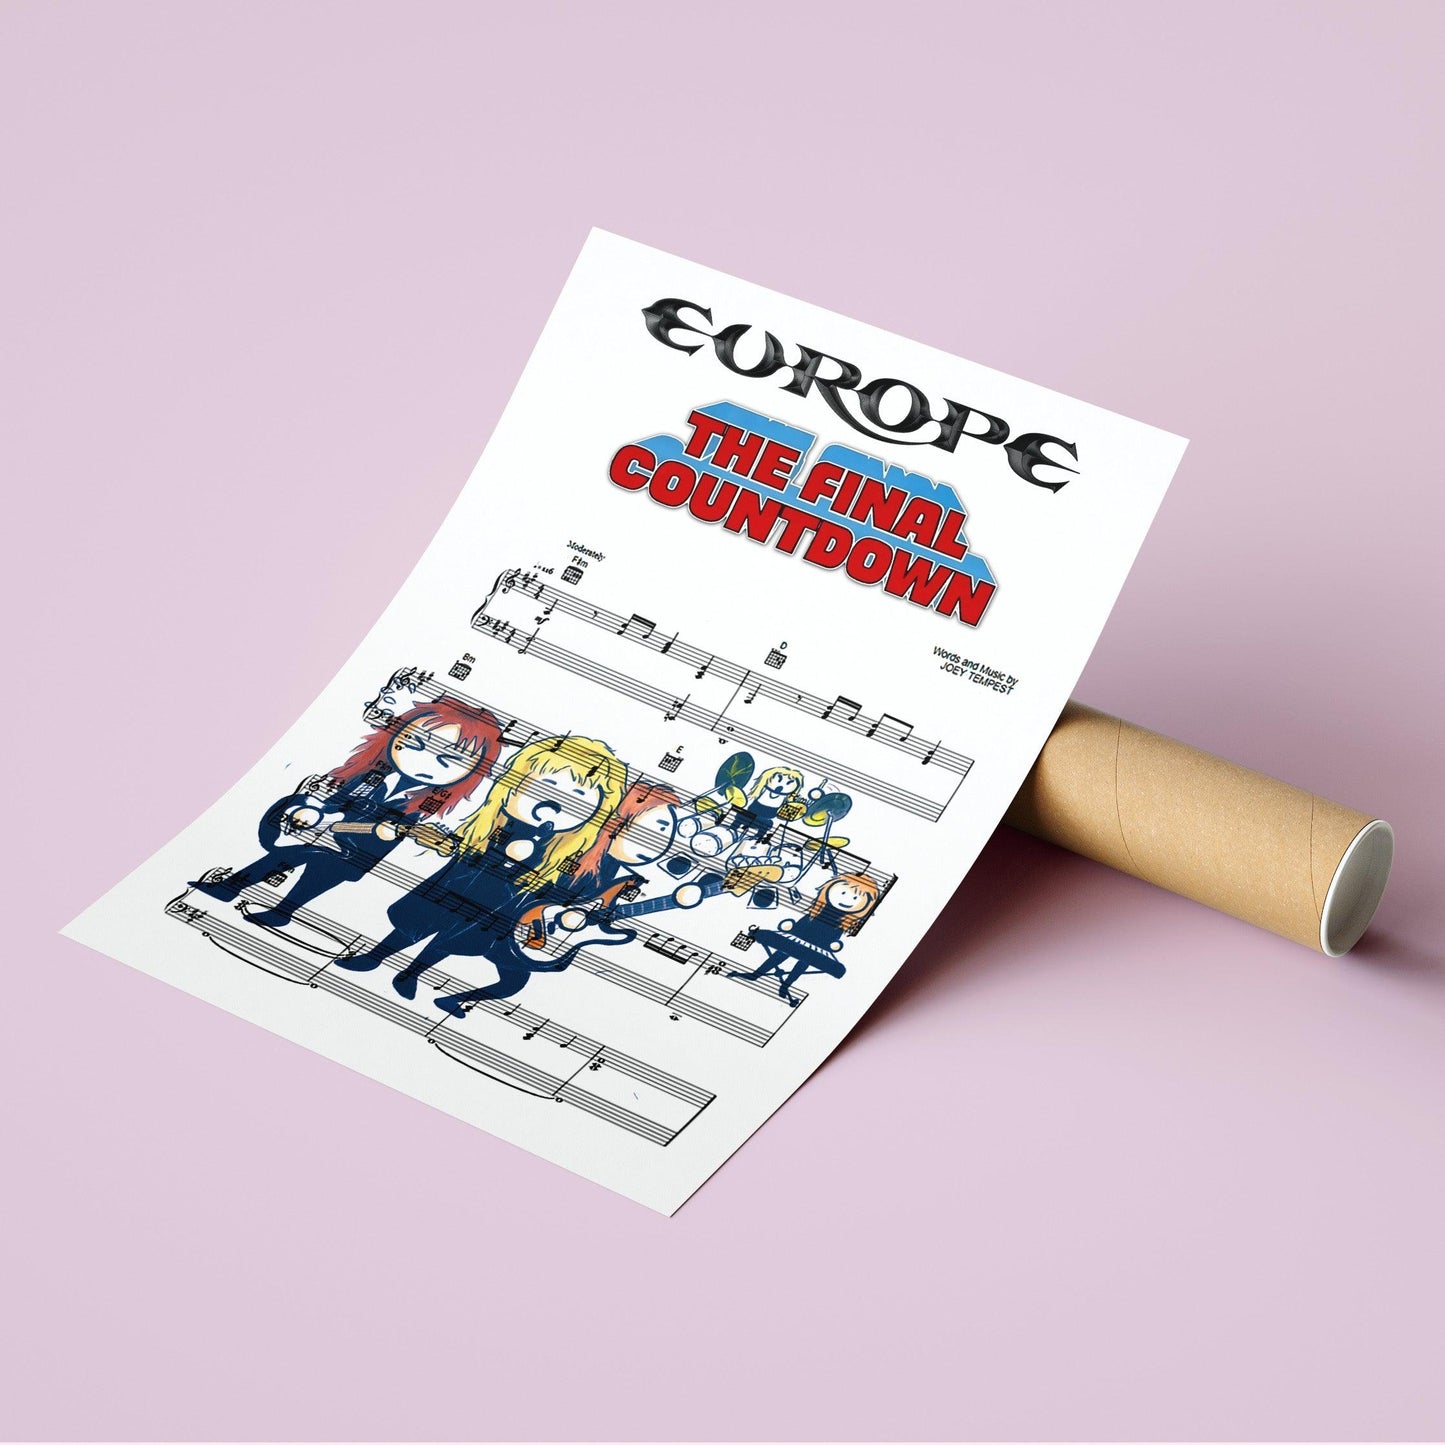 Europe - The Final Countdown Print | Song Music Sheet Notes Print Everyone has a favorite song especially Europe Poster, and now you can show the score as printed staff. The personal favorite song sheet print shows the song chosen as the score. 